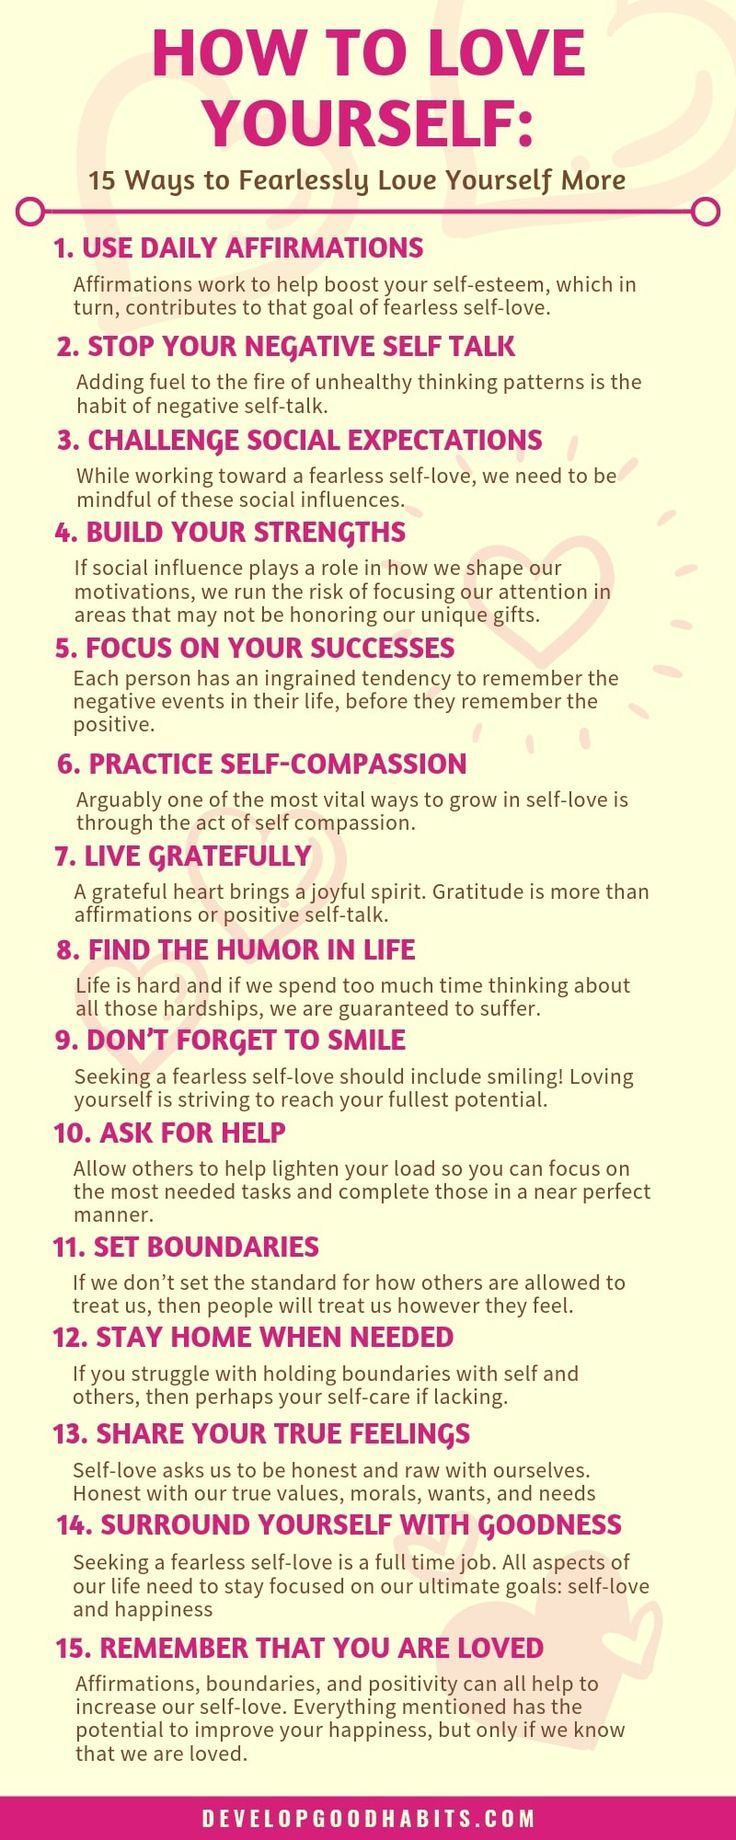 How to Love Yourself: 15 Ways to Increase your Self-Love